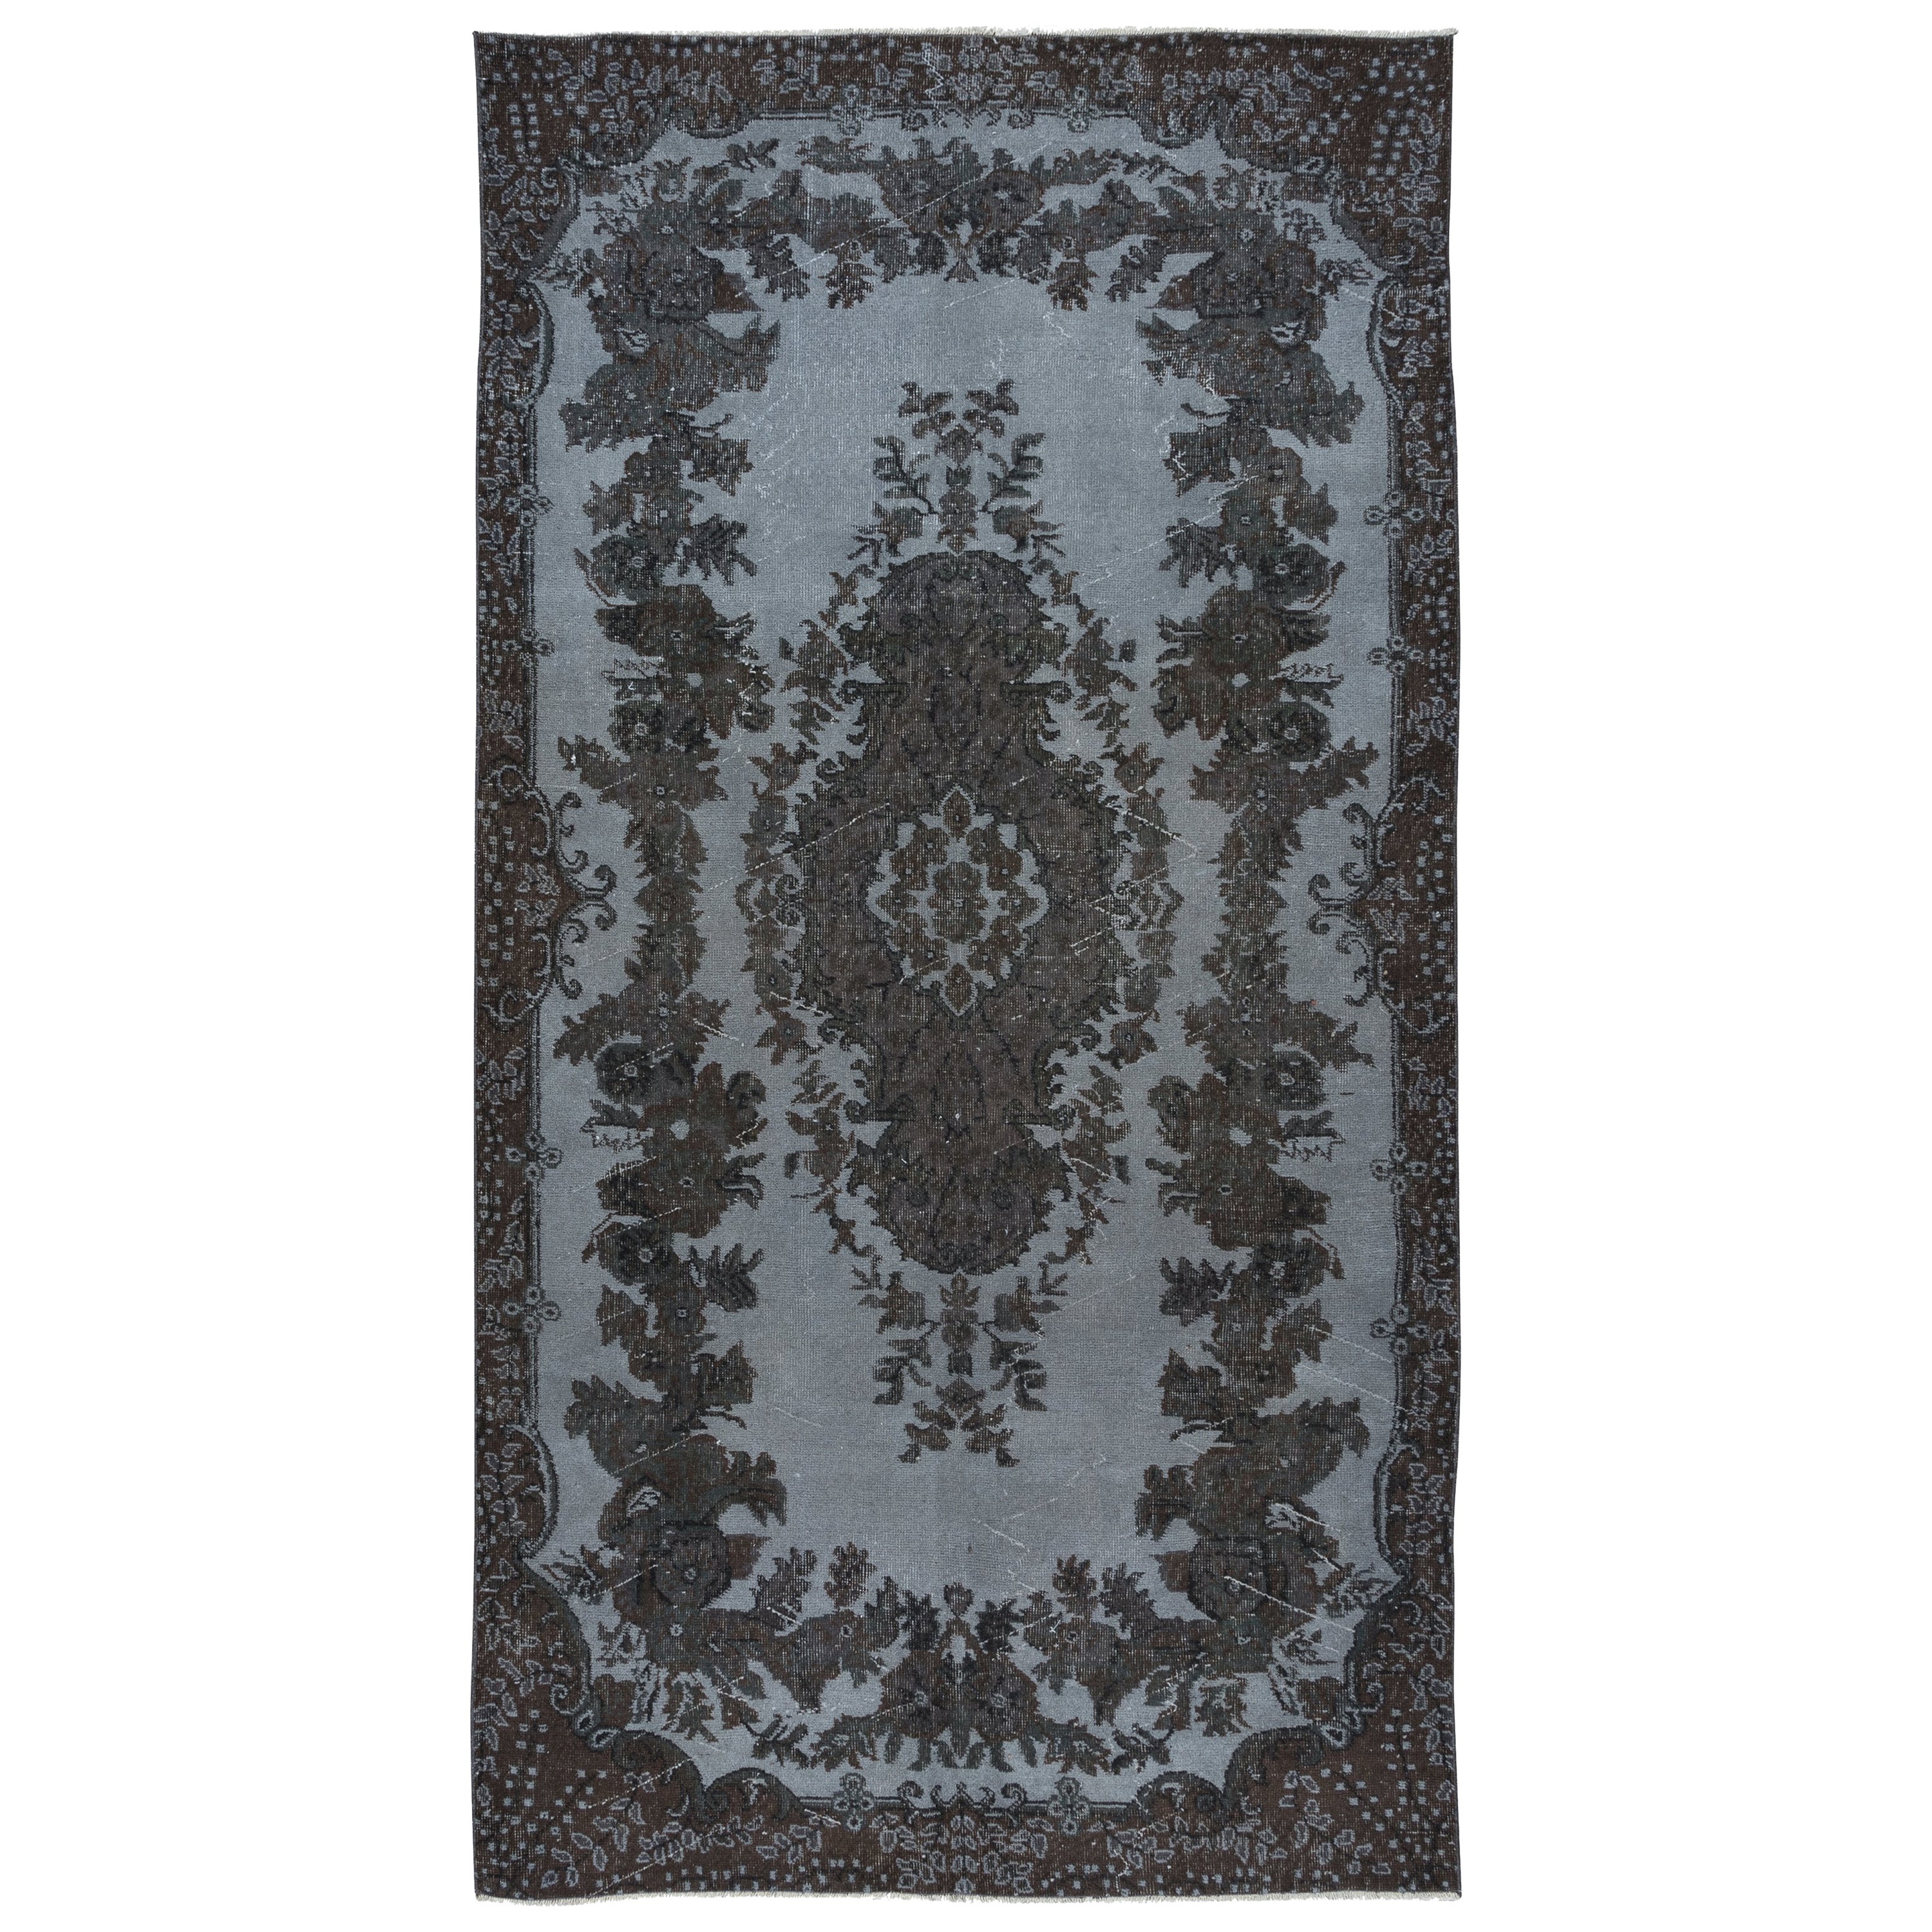 5.3x9.7 Ft Gray Handmade Turkish Area Rug for Living Room and Dining Room